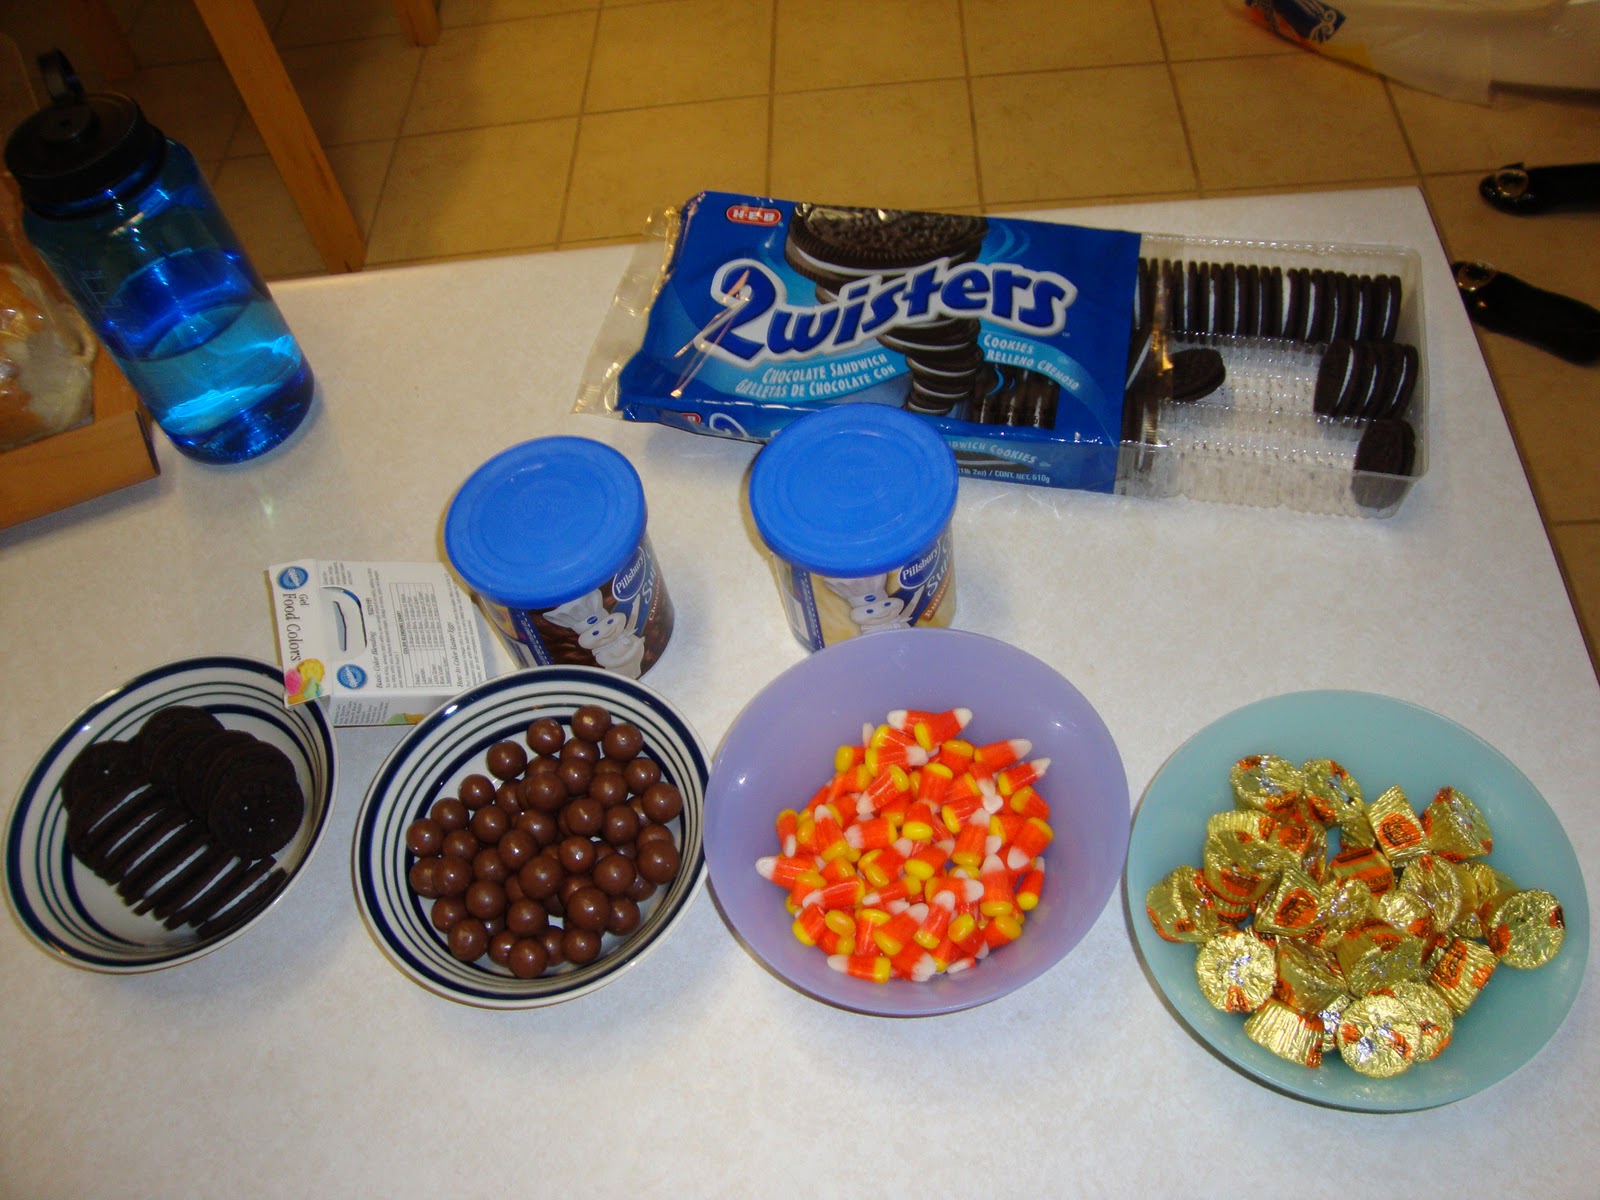 Whopper Candy Ingredients